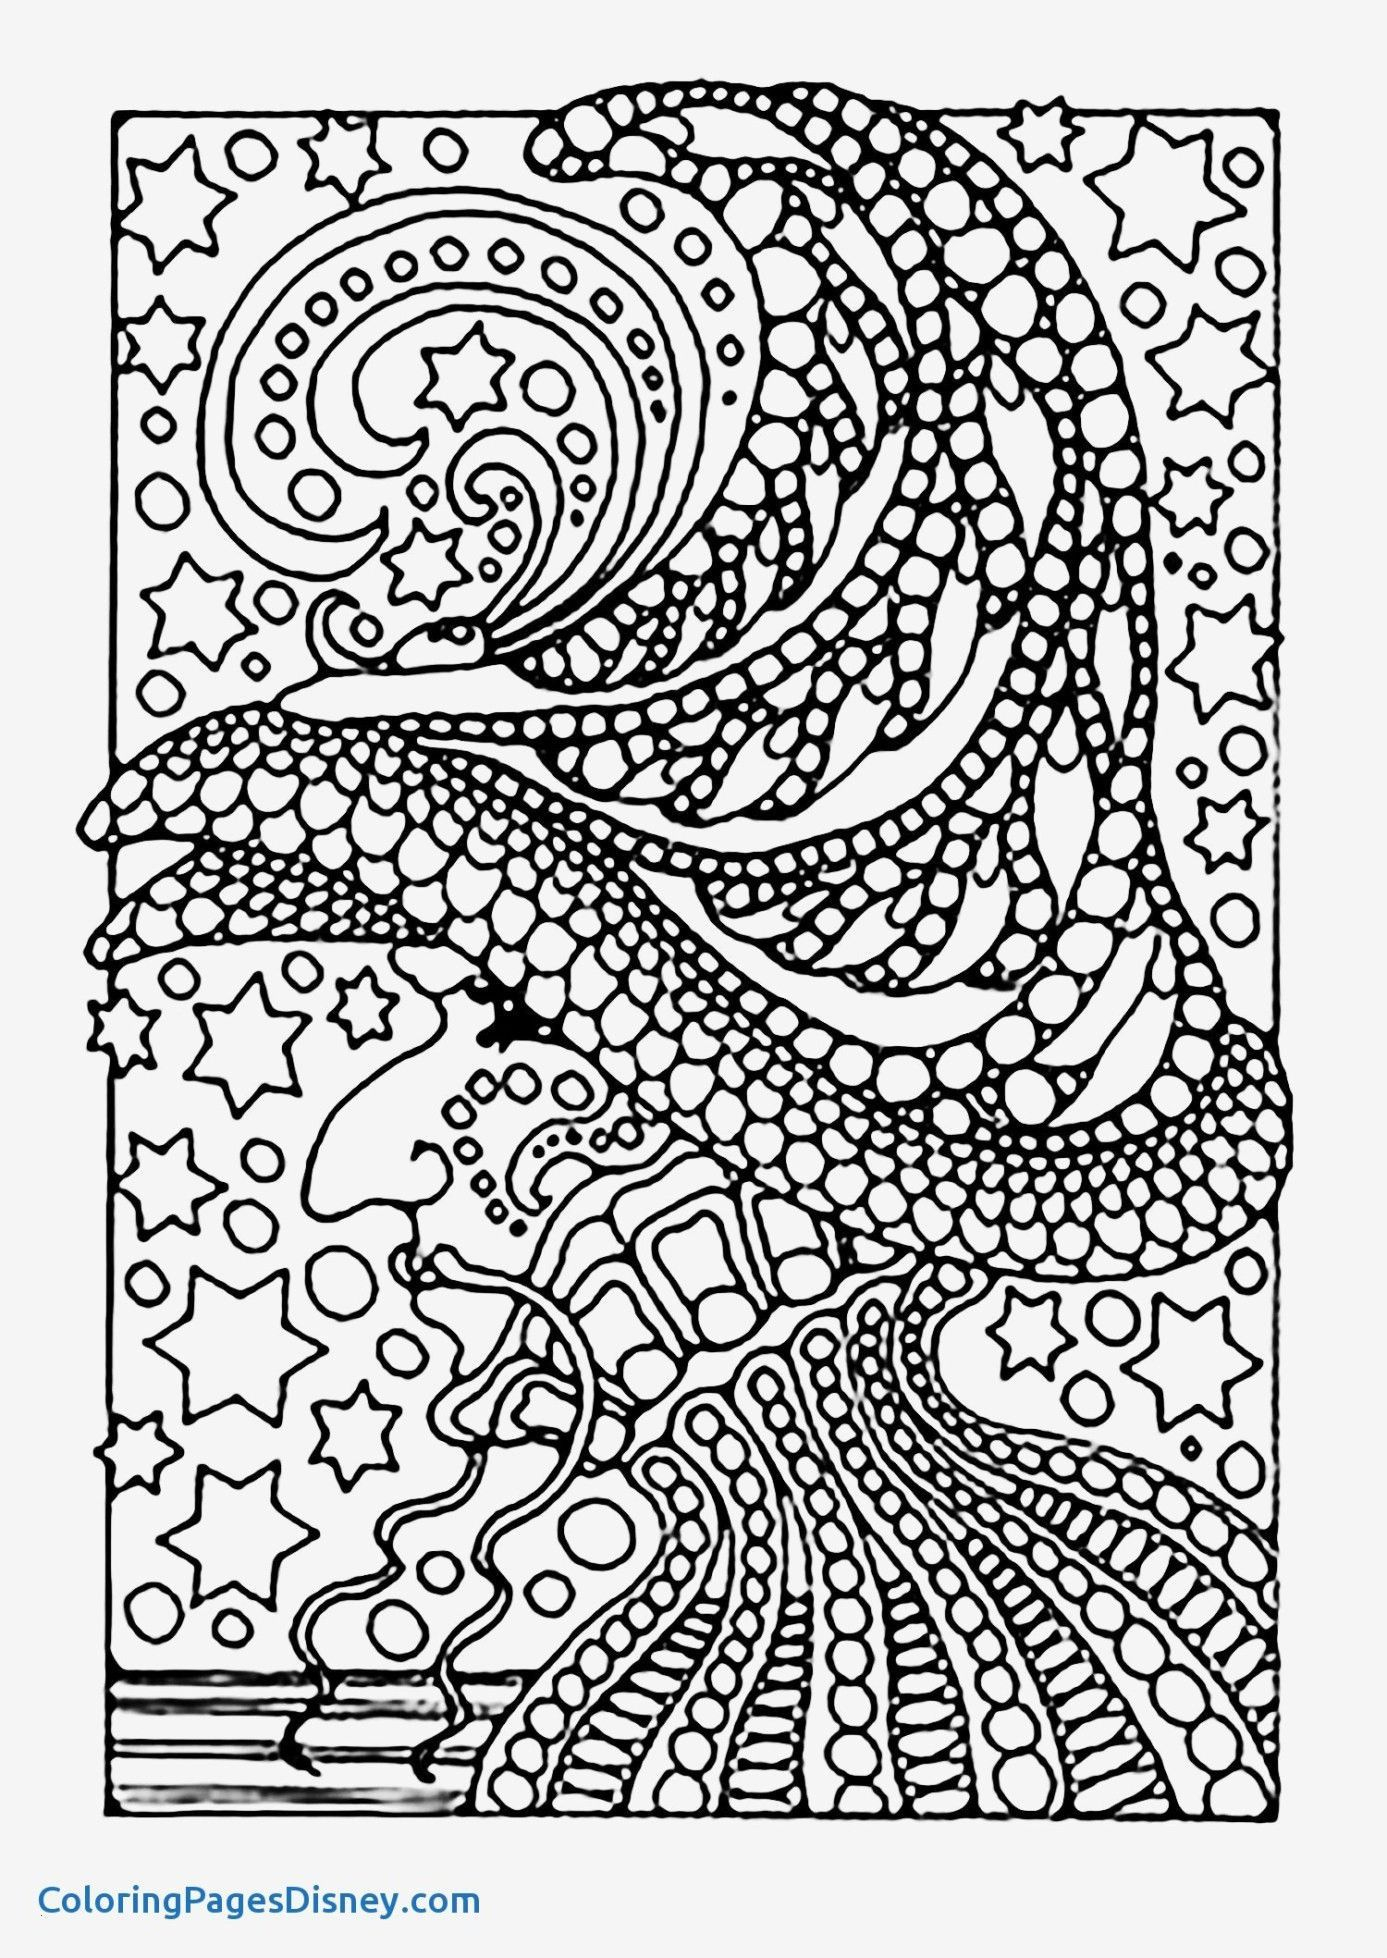 Disney.com Coloring Pages Lovely Lion King Coloring Pages Fvgiment